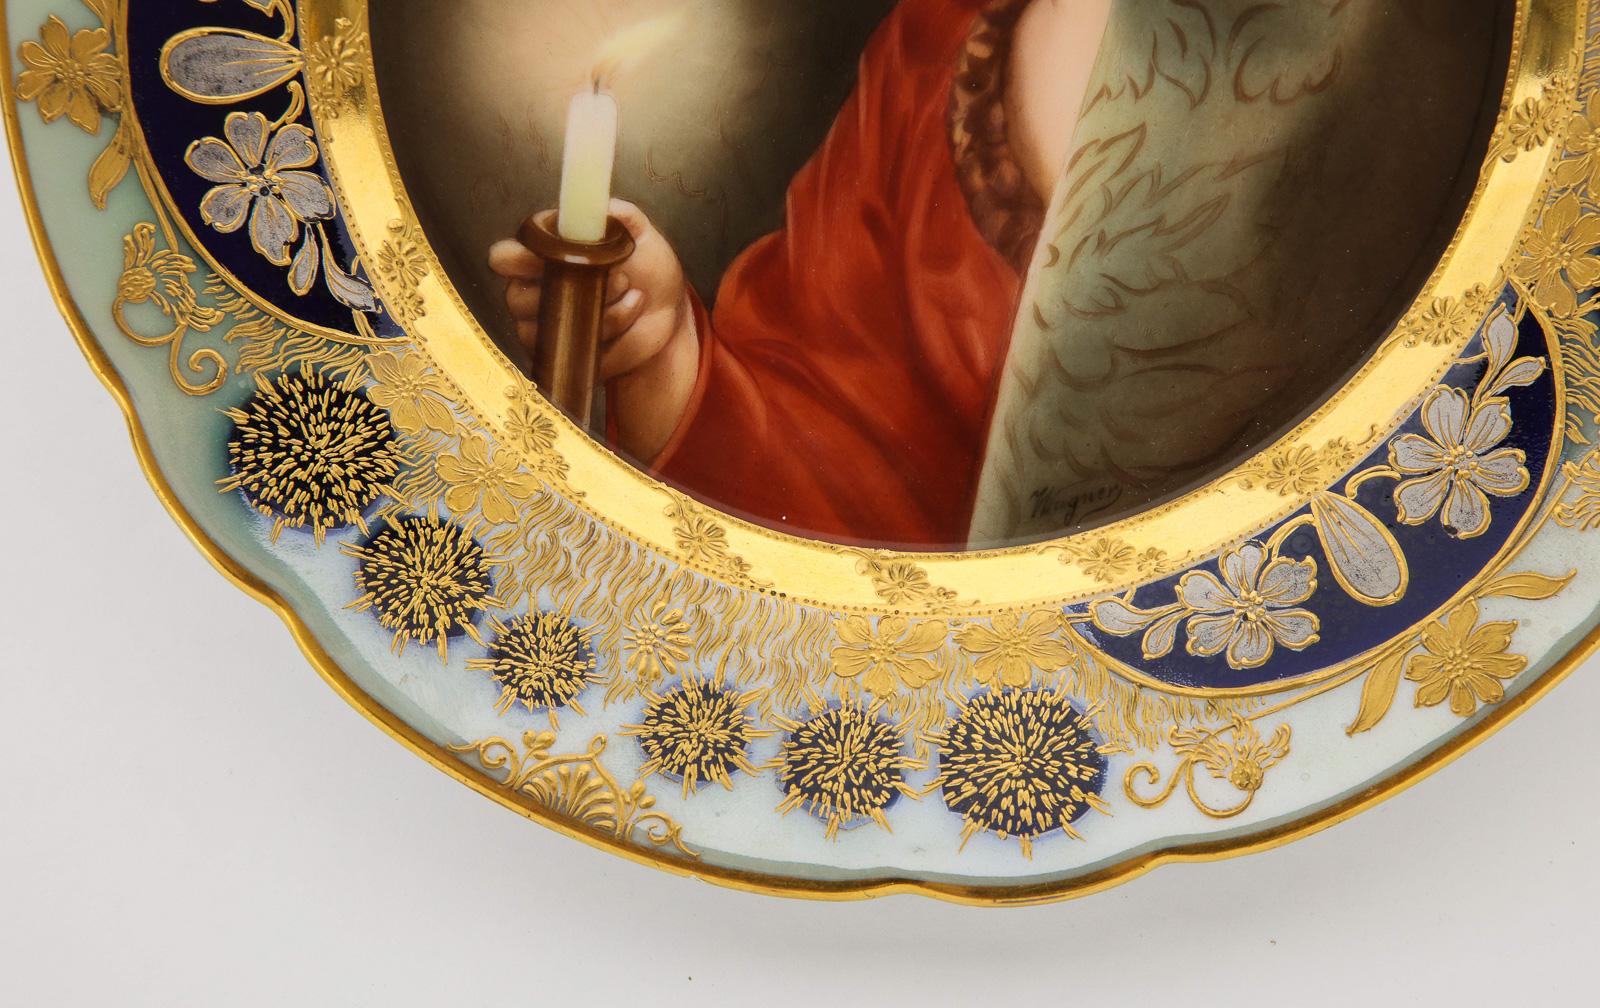 Rare and Exceptional Art Nouveau Royal Vienna Porcelain Plate by Wagner 1